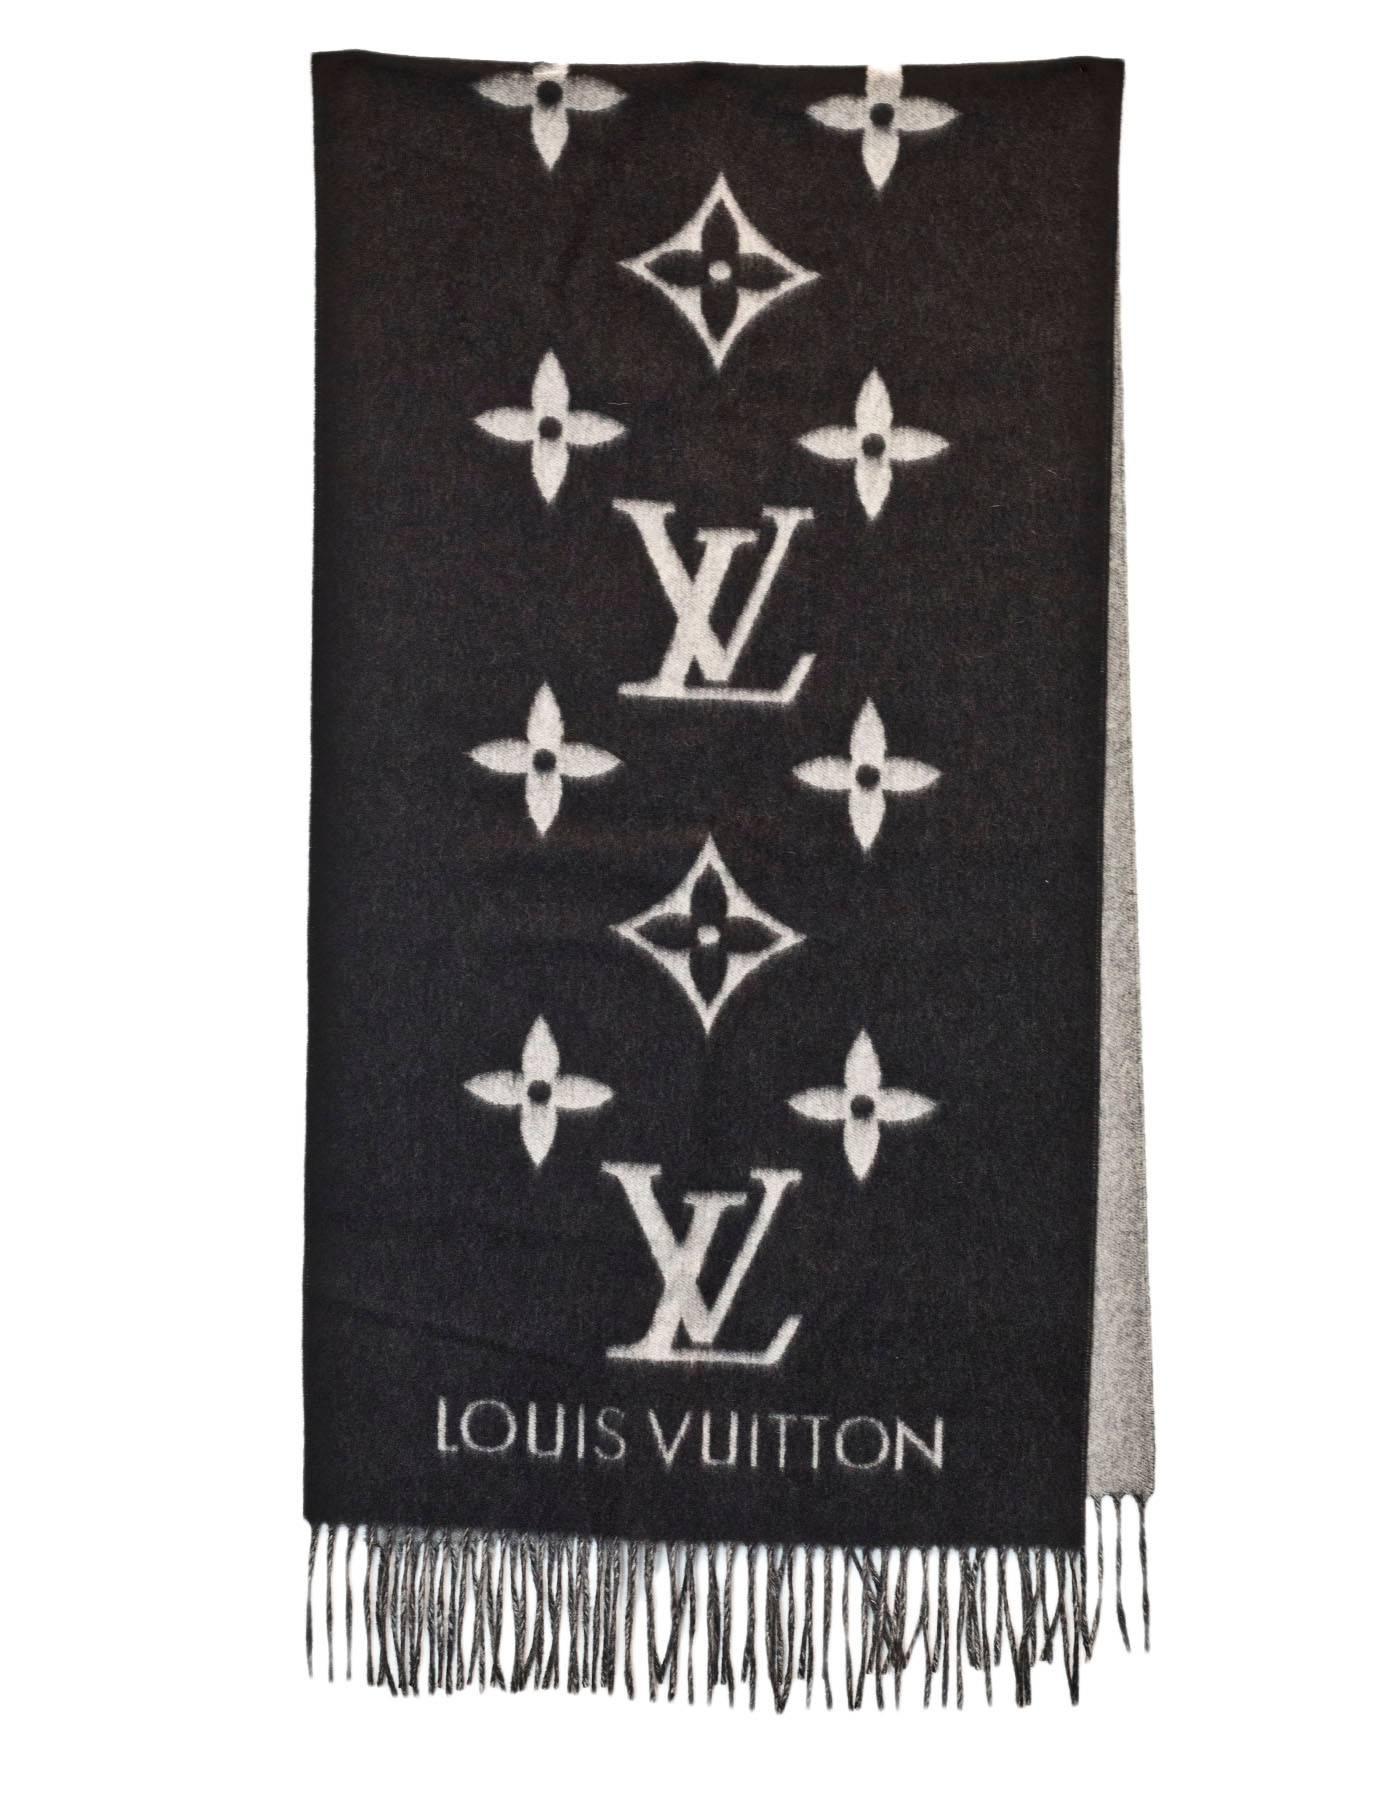 Louis Vuitton Black & Grey Monogram Reykjavik Cashmere Scarf

Made In: Italy
Color: Black, grey
Composition: 100% cashmere
Overall Condition: Excellent pre-owned condition

Measurements: 
Length: 68"
Width: 18.5"